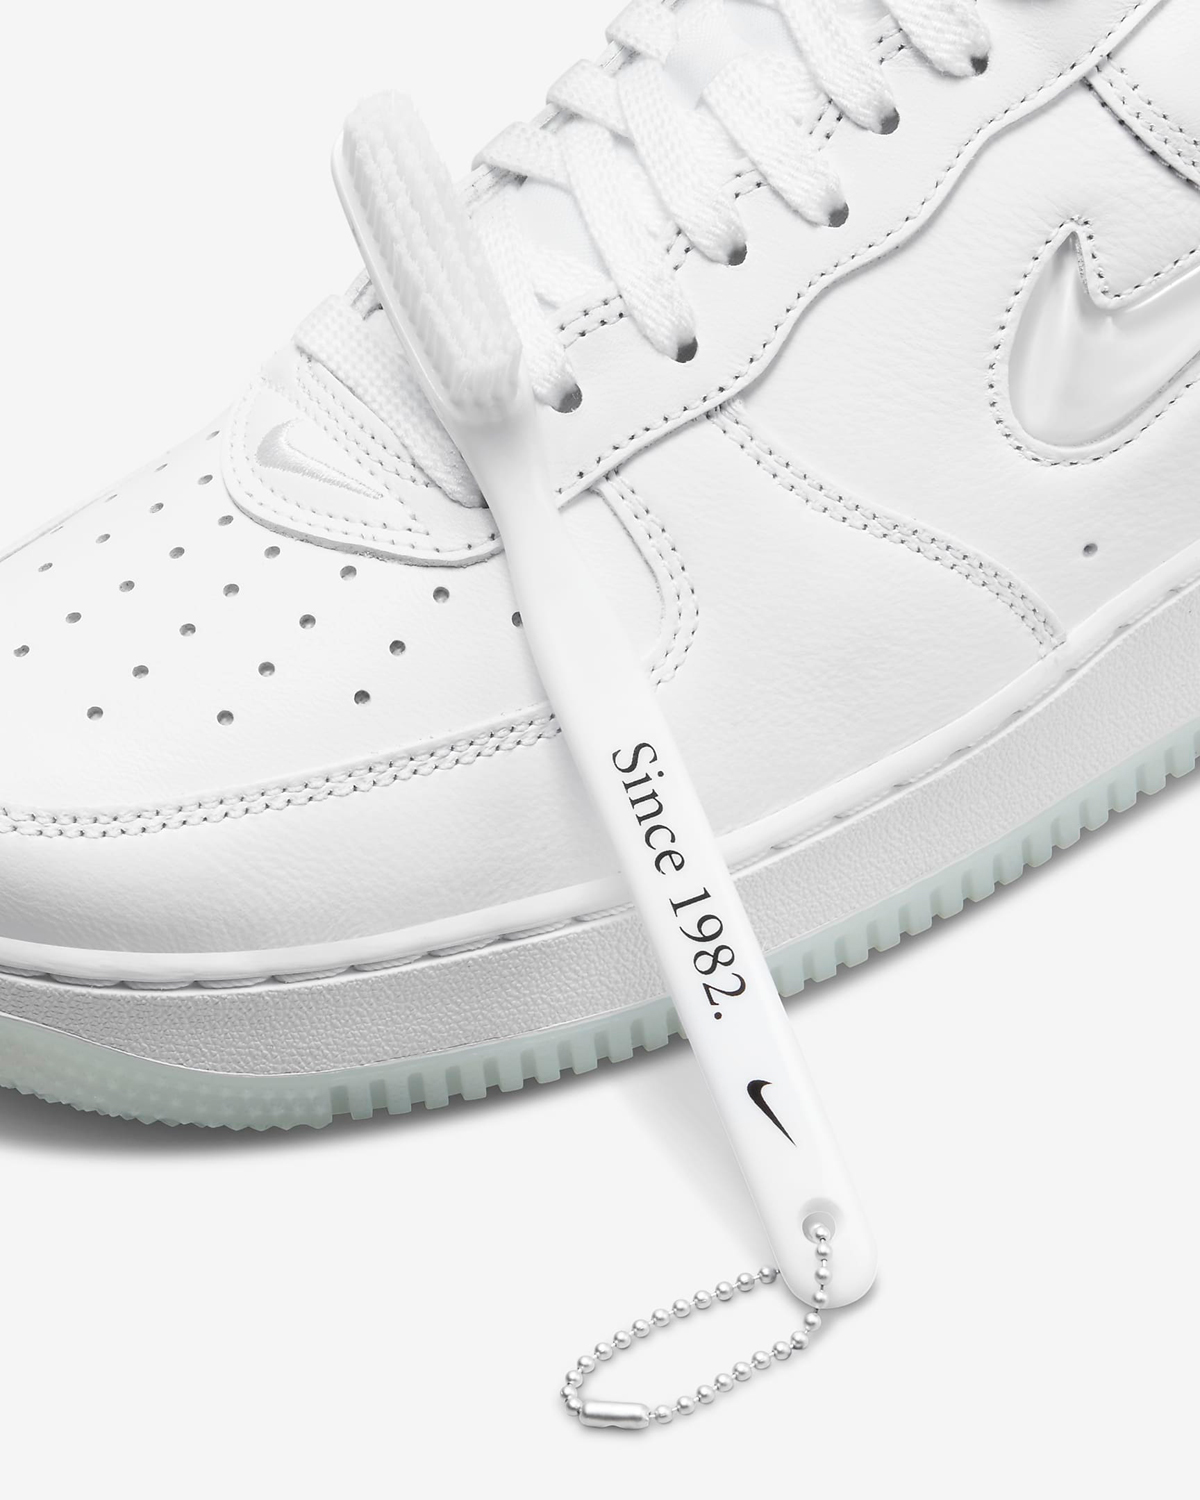 Nike-Air-Force-1-Low-White-Jewel-Color-of-the-Month-9